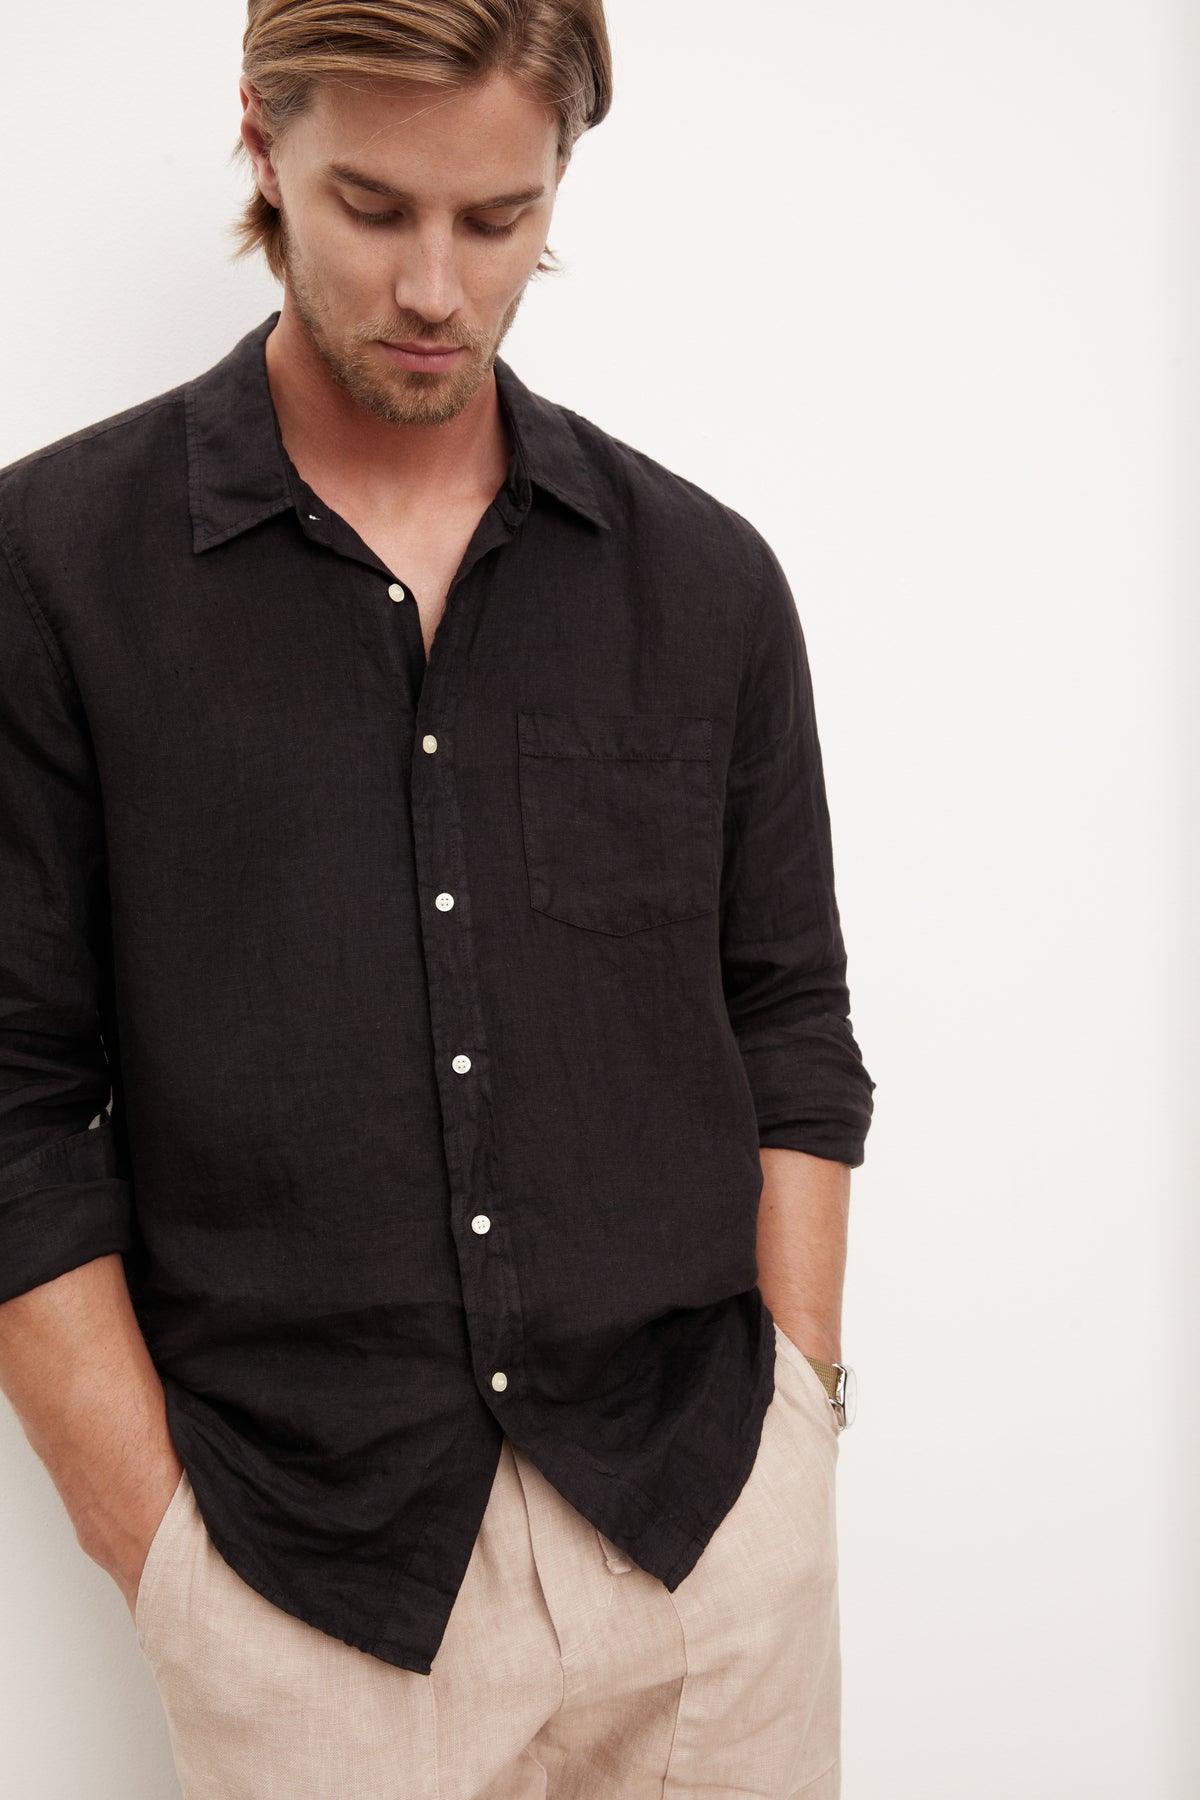 A stylish man in a Velvet by Graham & Spencer BENTON LINEN BUTTON-UP SHIRT leaning against a wall.-36009360425153